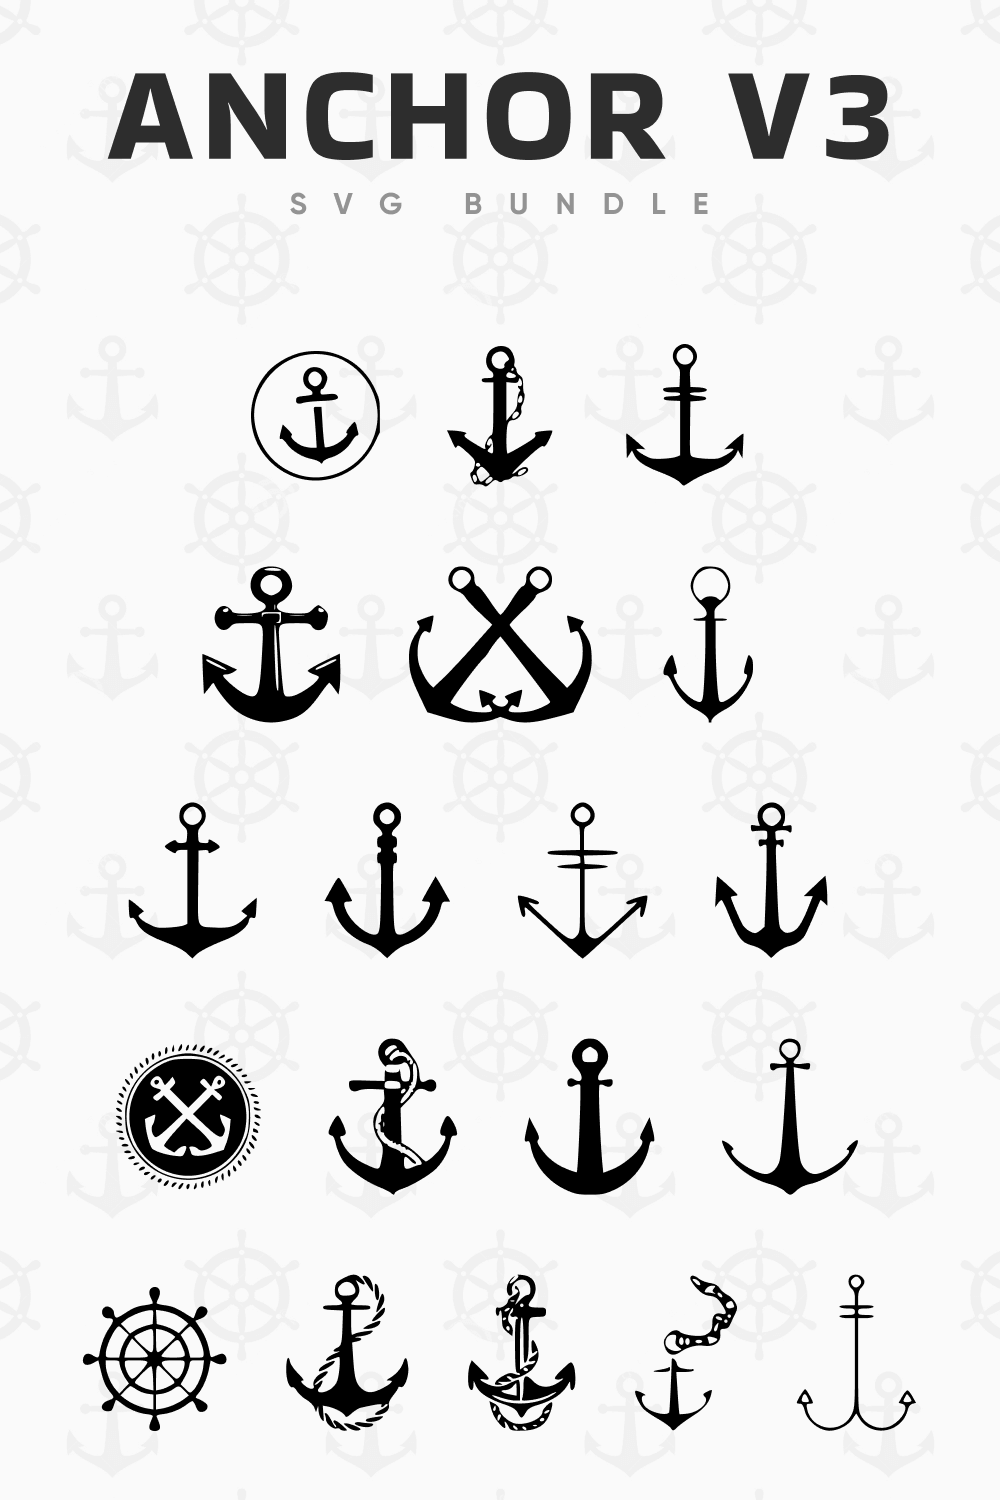 Drawings of Anchors of Different Shapes and Sizes.